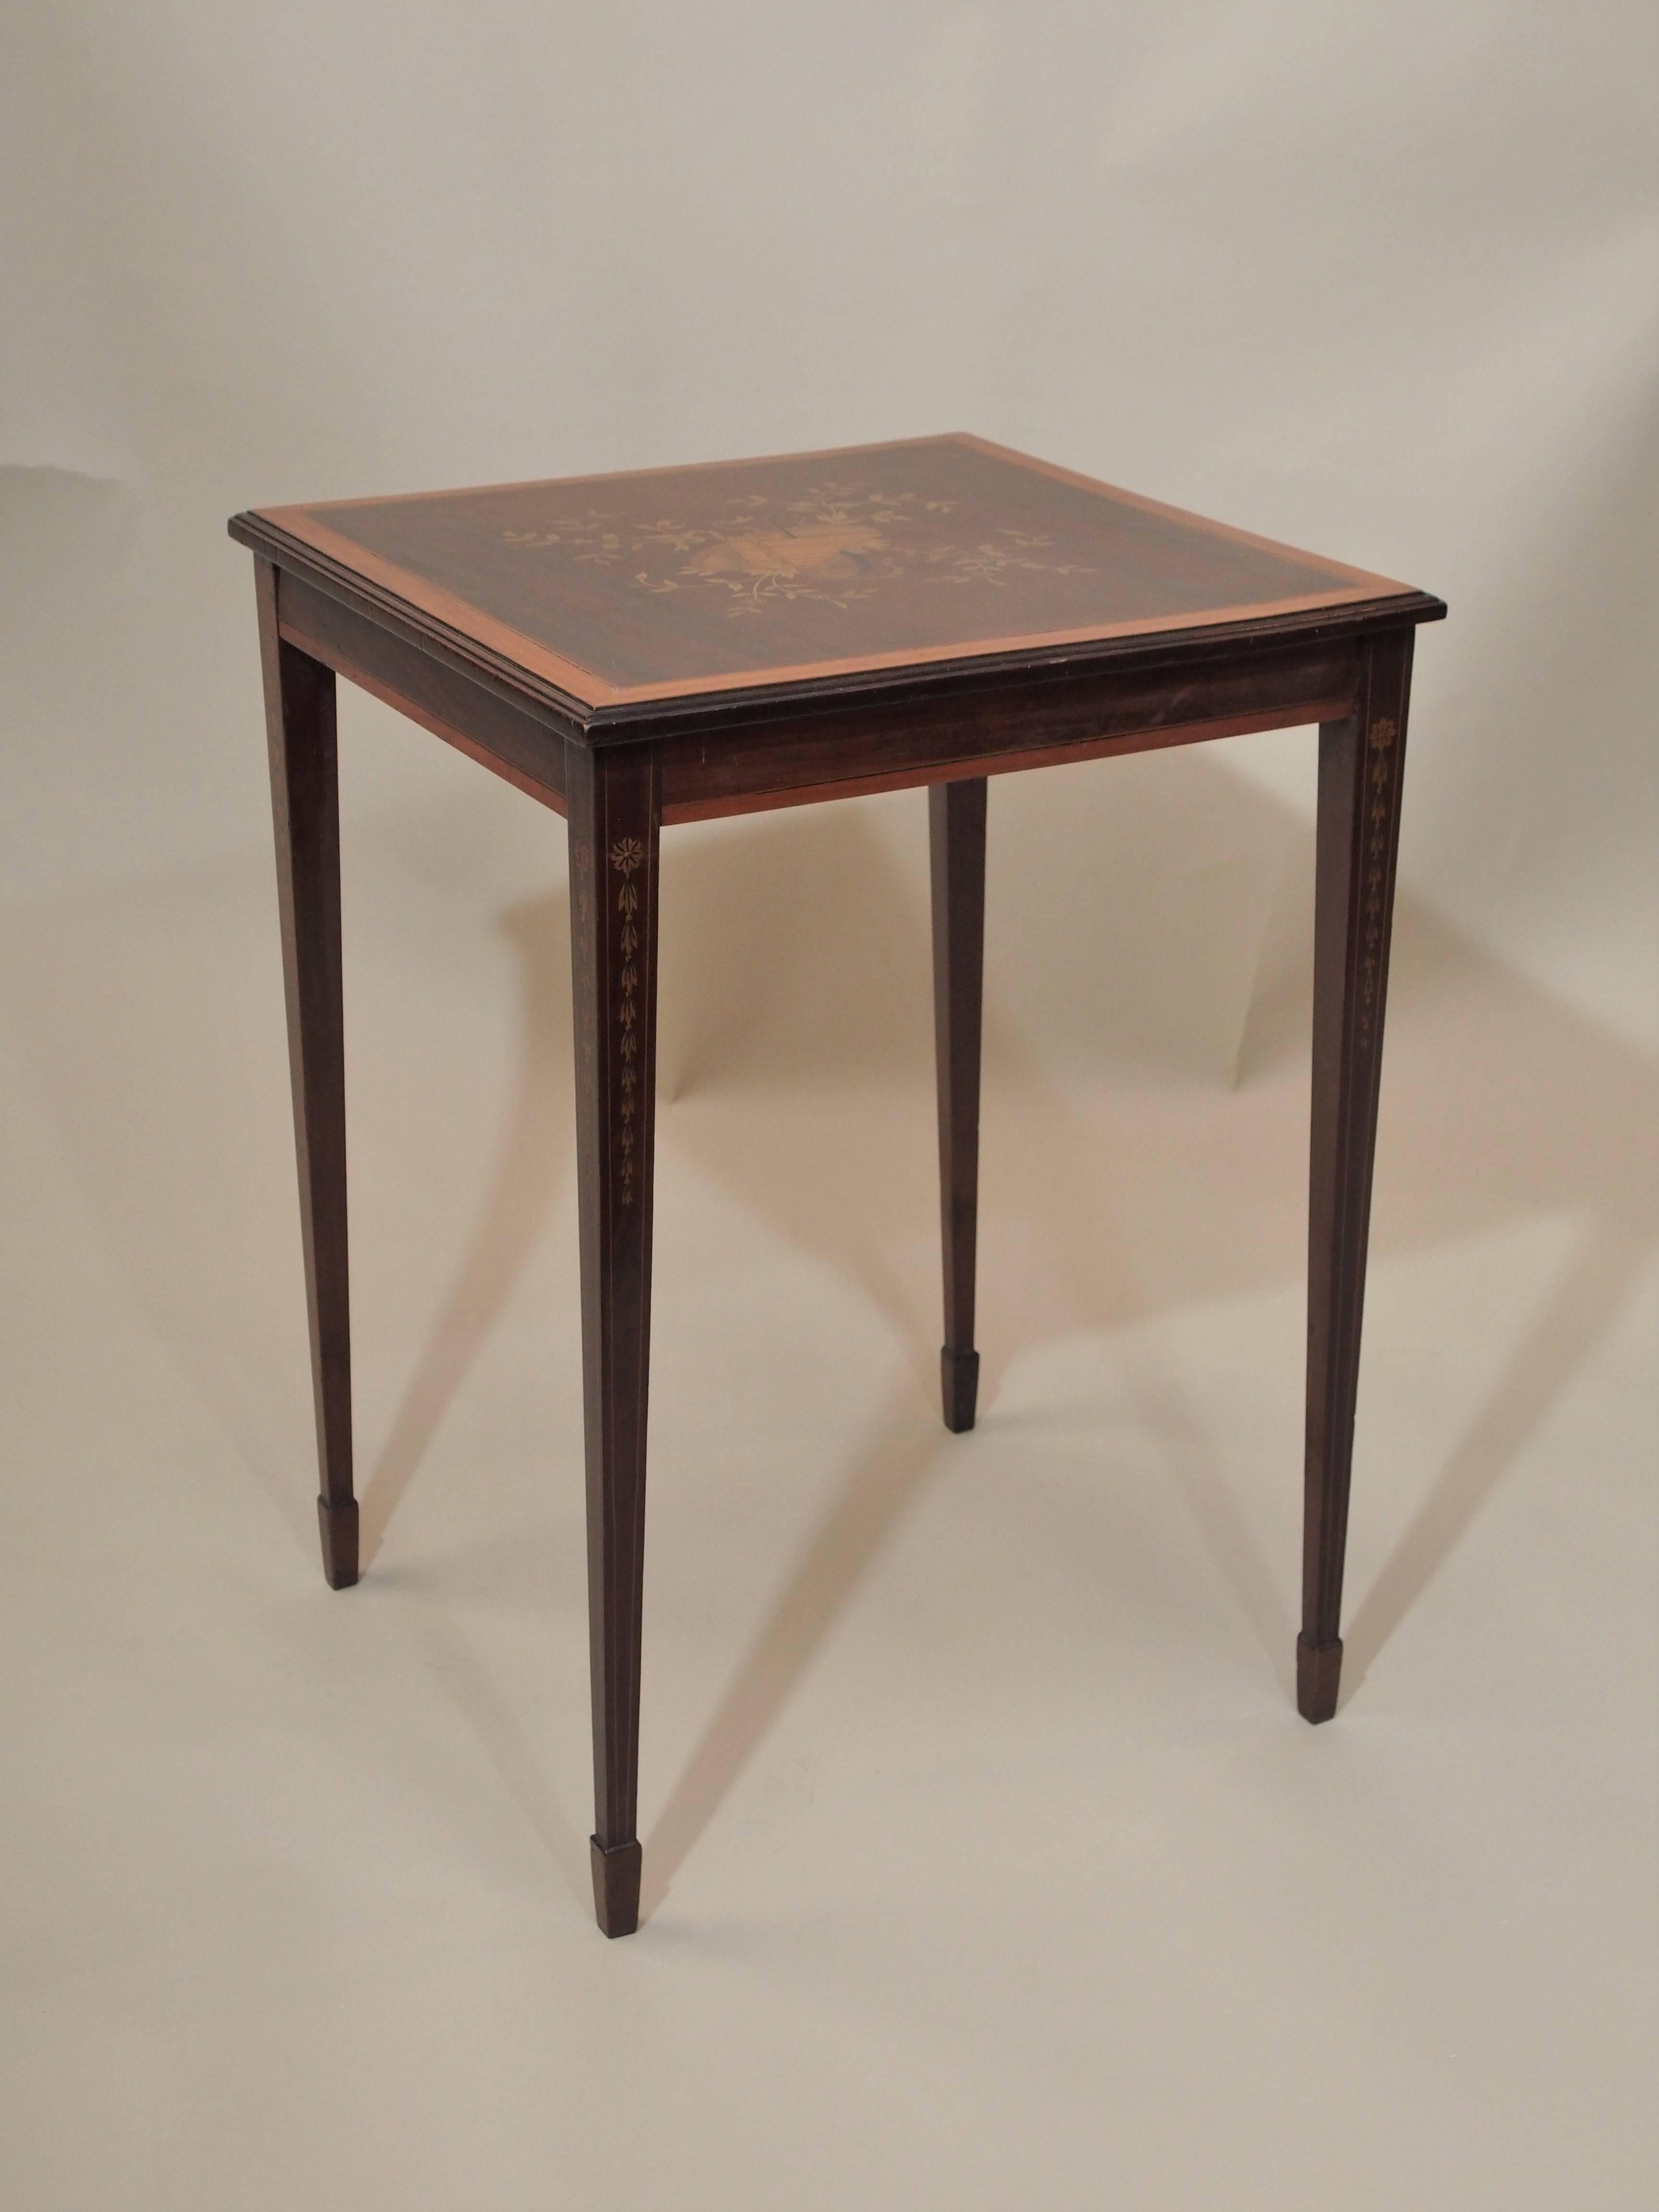 The inlay on this occasional table is very nice and typical of the period.